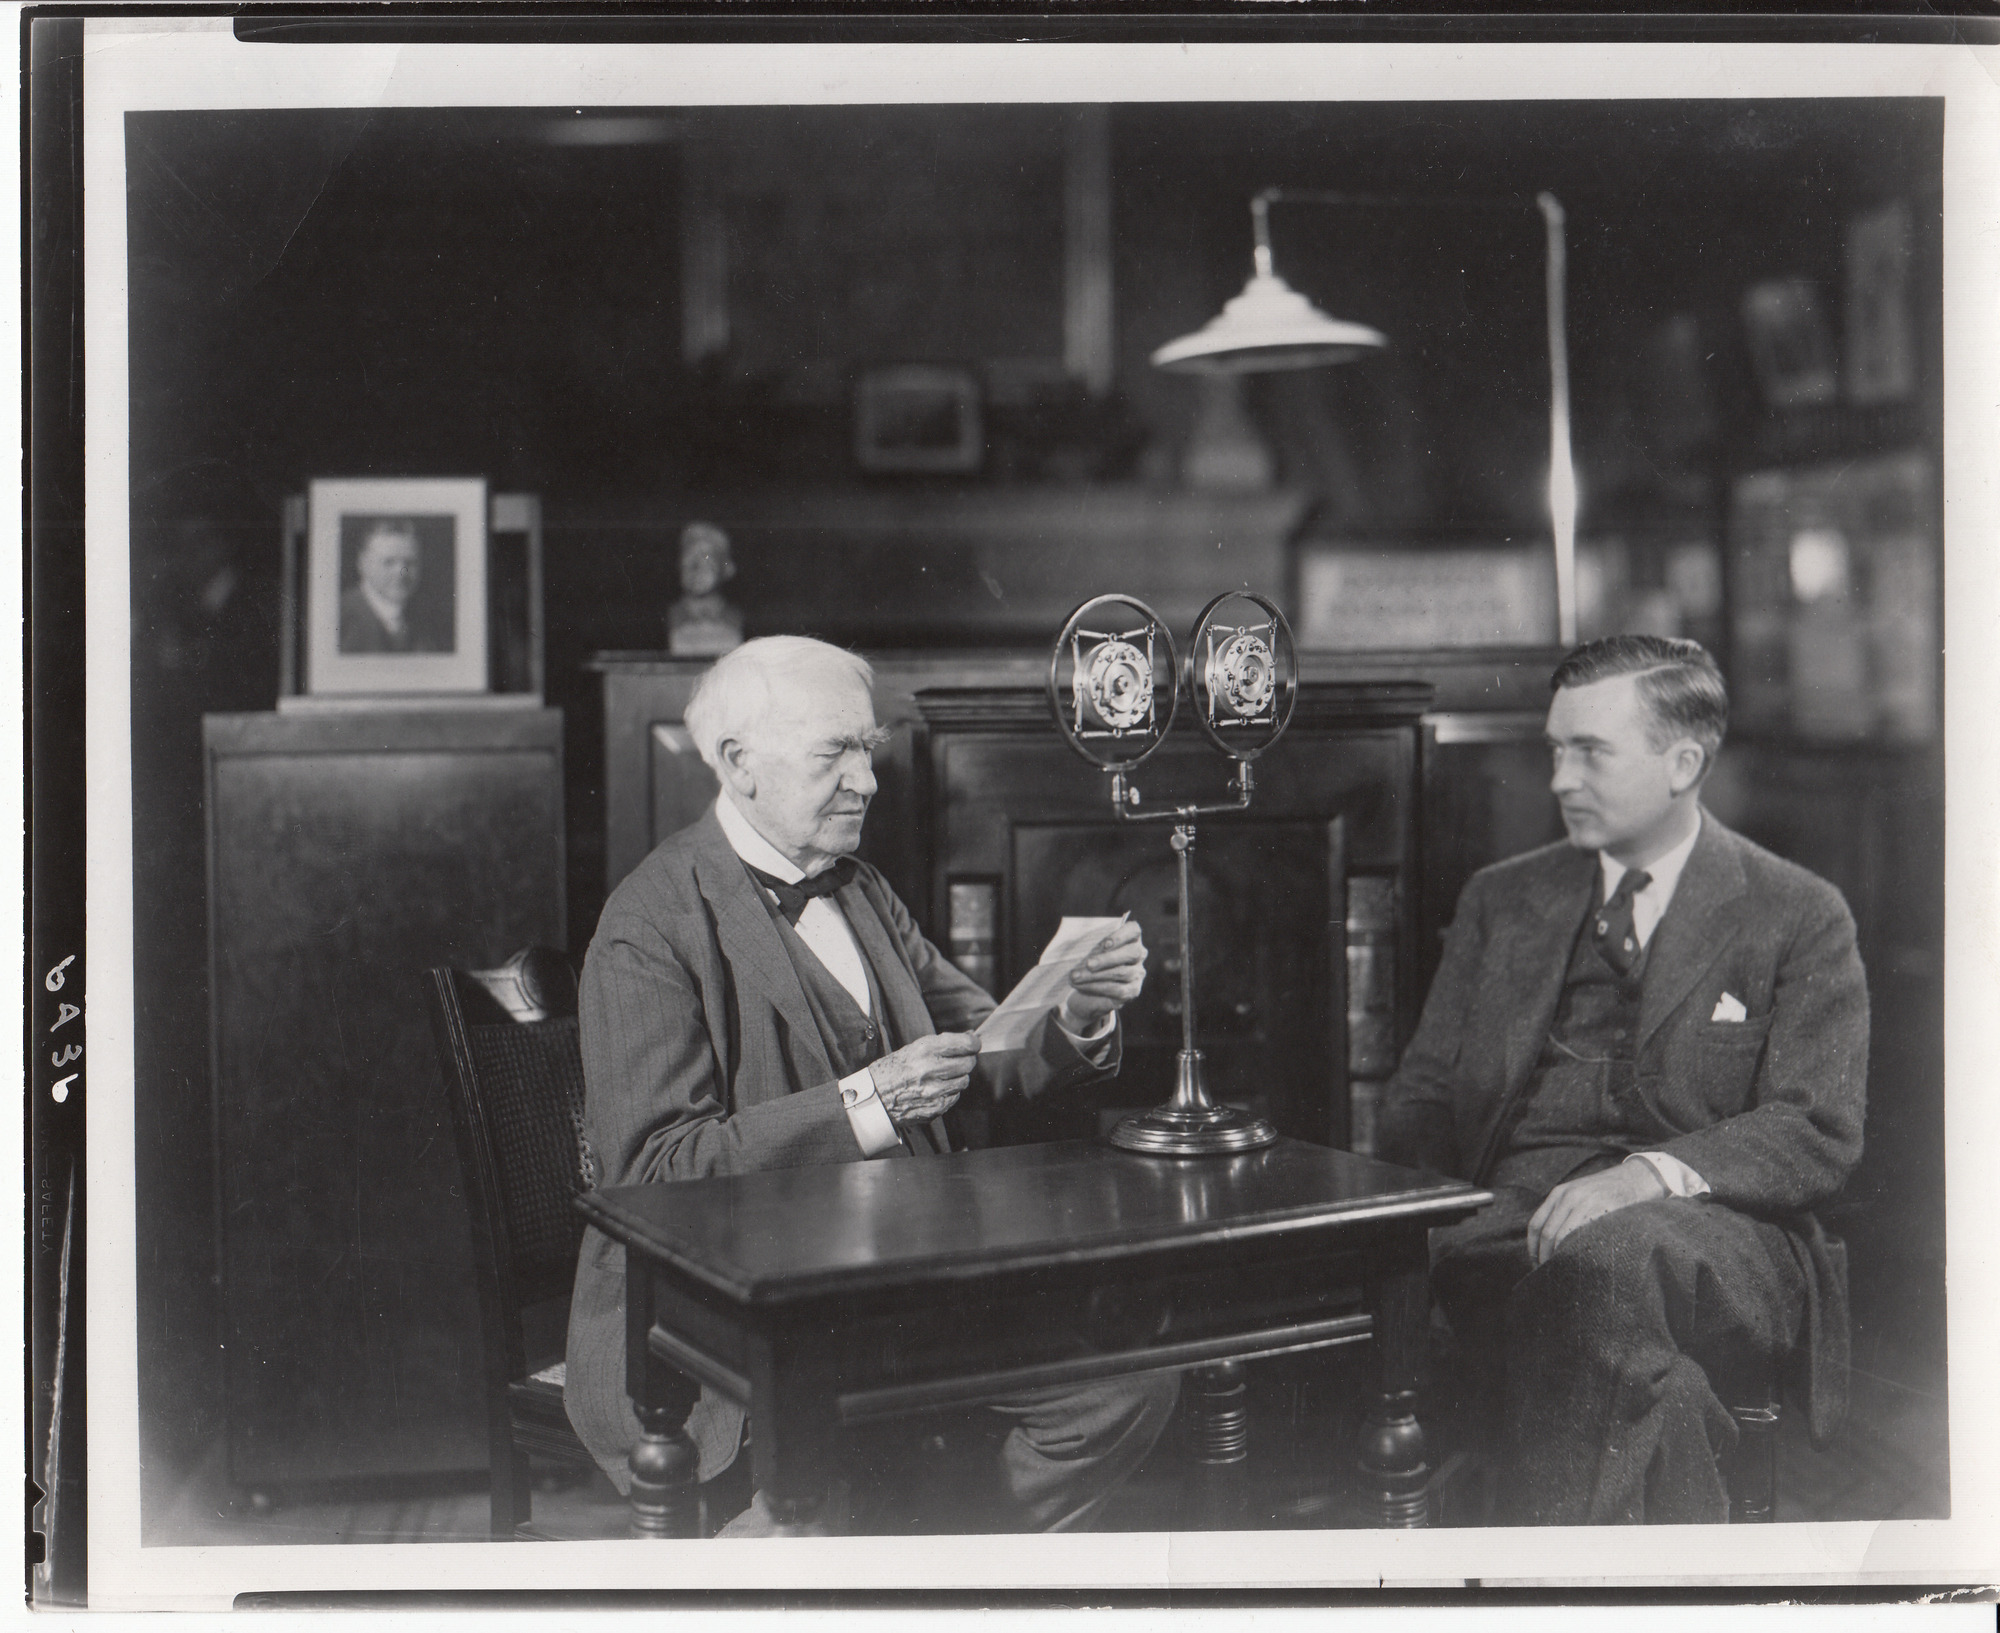 Charles Edison with Thomas Edison in the Building 5 Library. Thomas Edison is broadcasting to Schenectady, New York, on the occasion of a plaque dedication at the first General Electric building there.